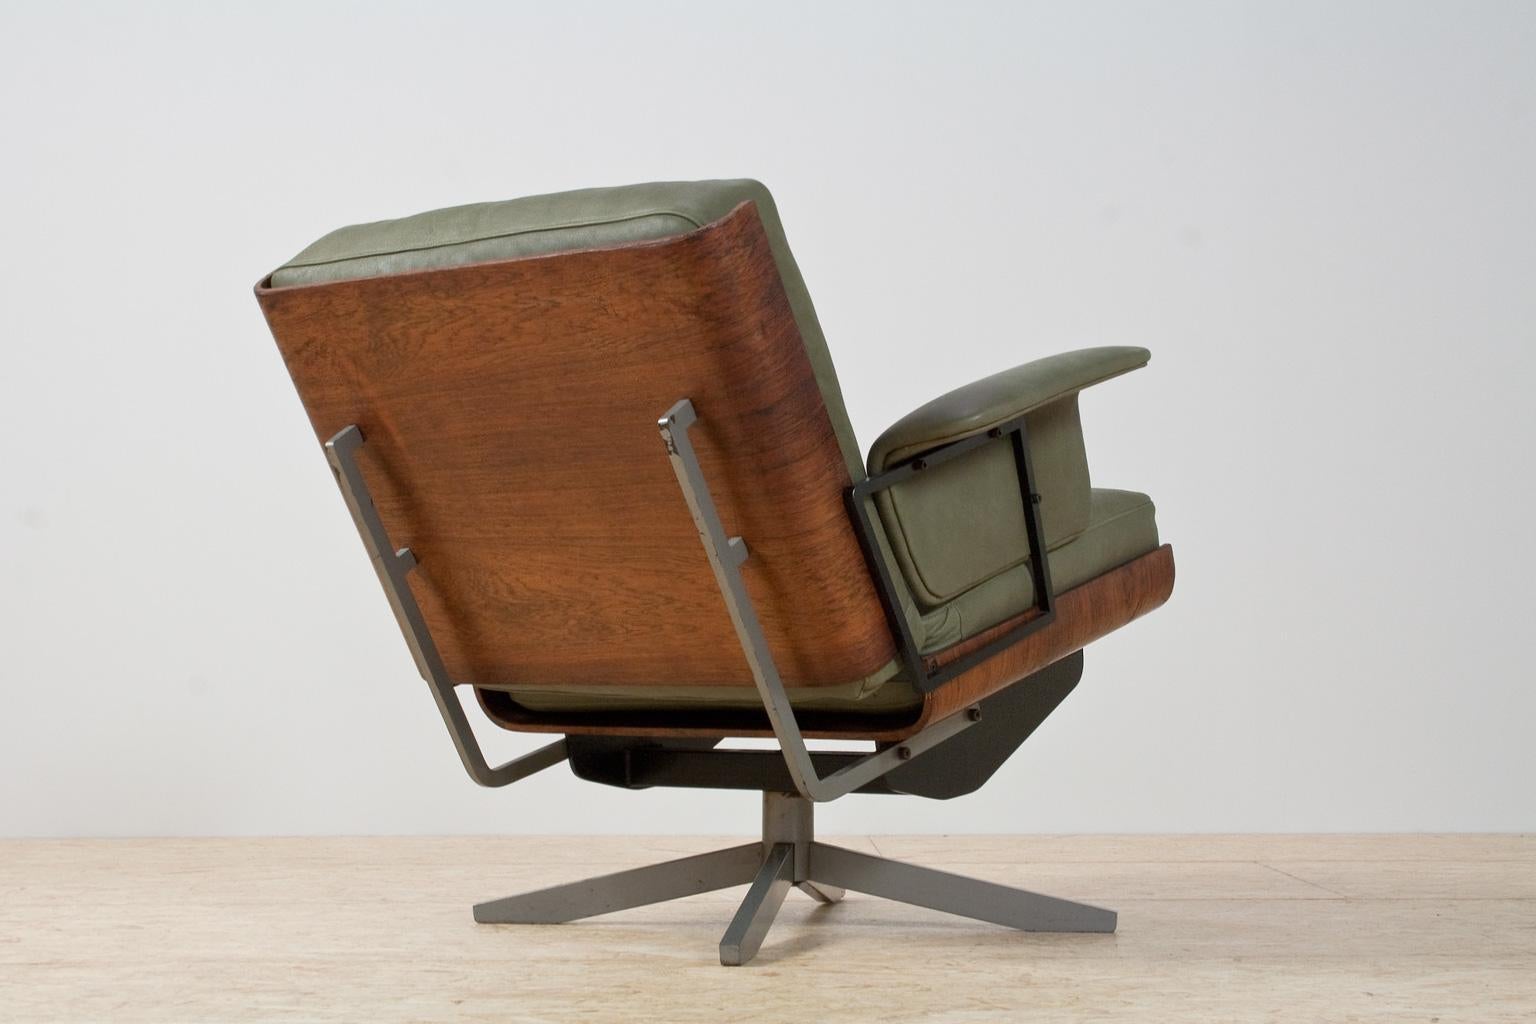 German Mid-Century Modern Swivel Lounge Chair in Green Leather and Rosewood, 1960s